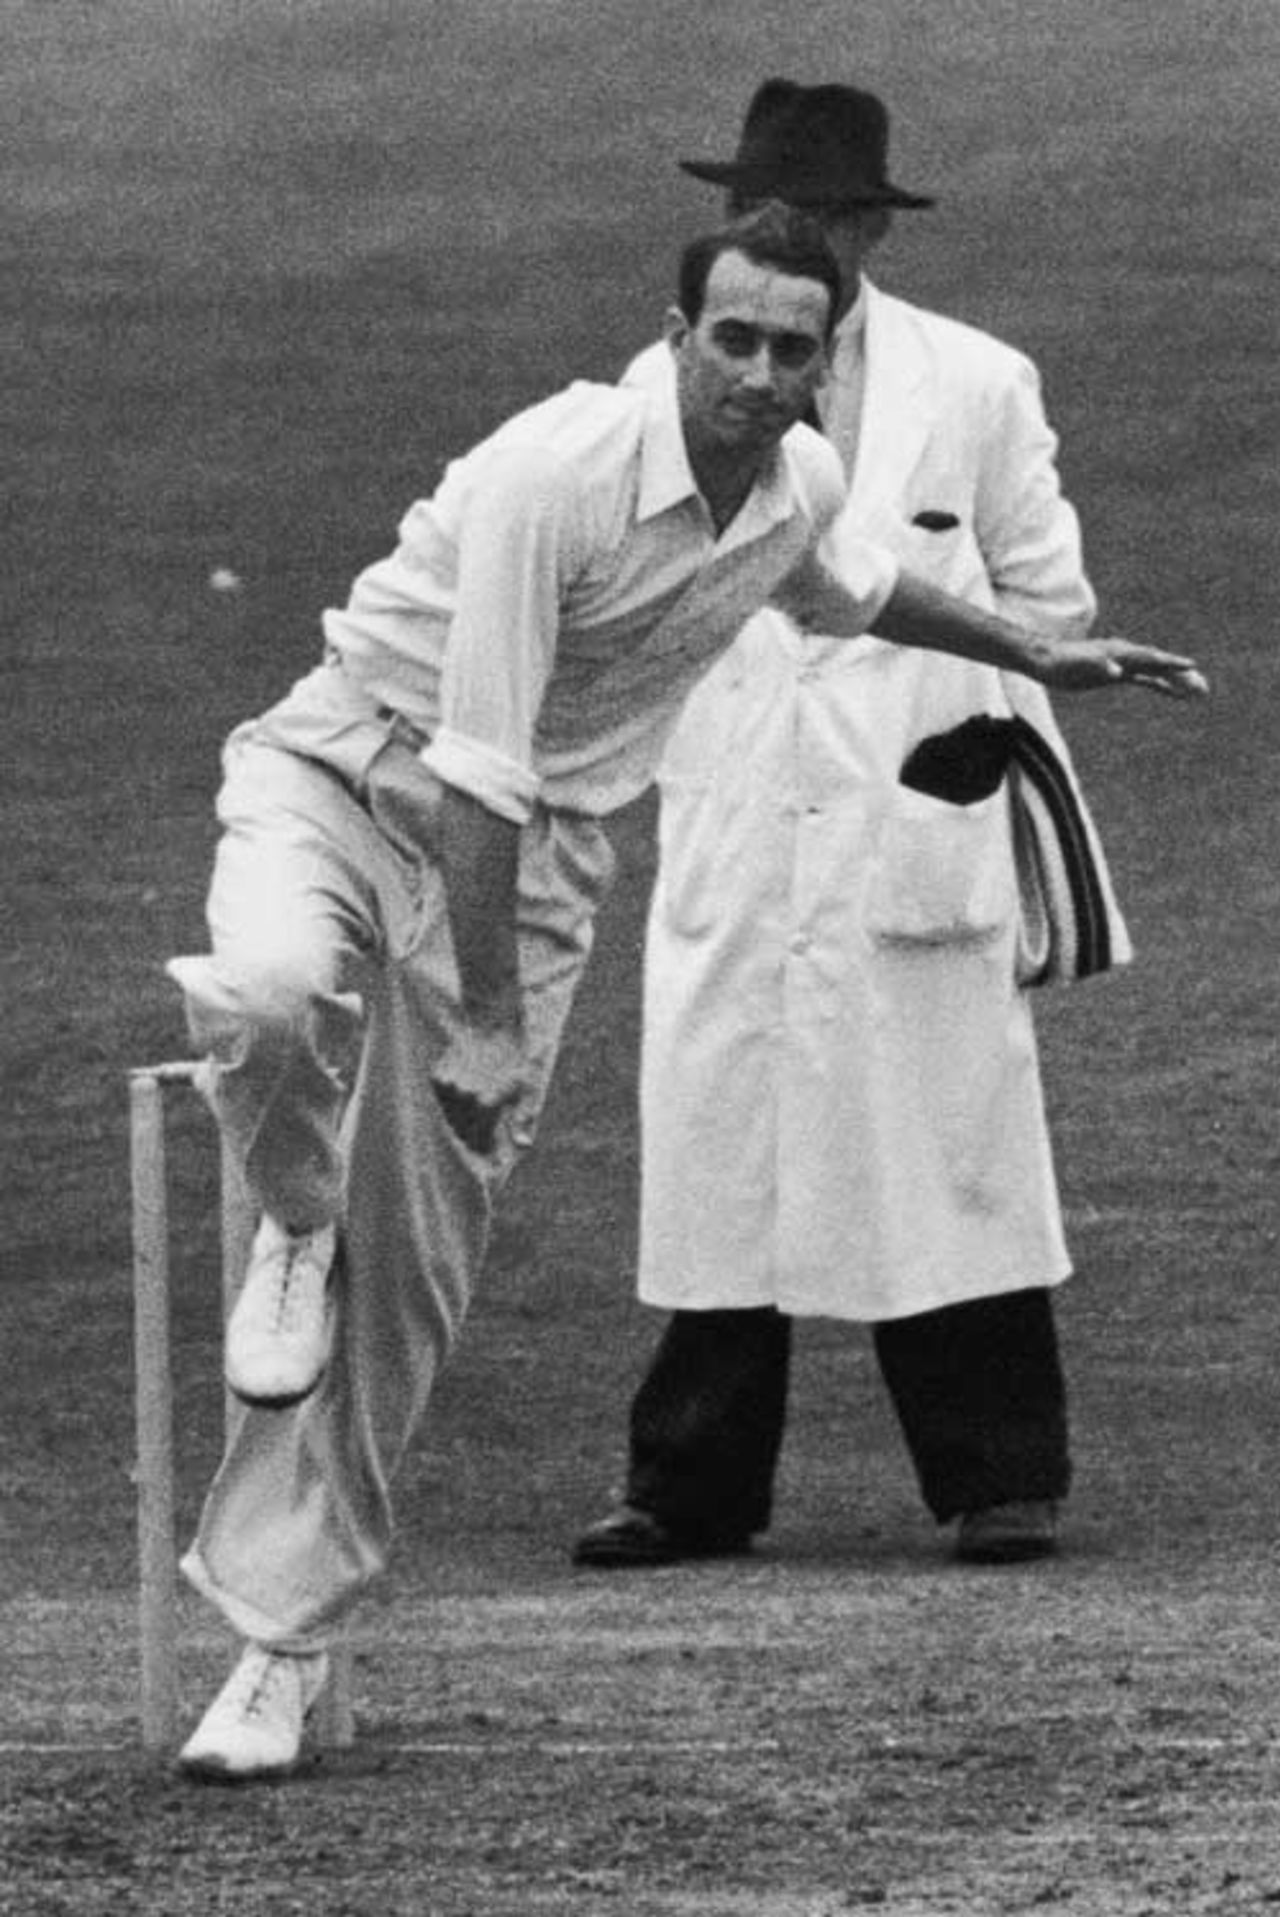 Hugh Tayfield of South Africa bowls against Surrey at The Oval, London, 18th July 1955 
